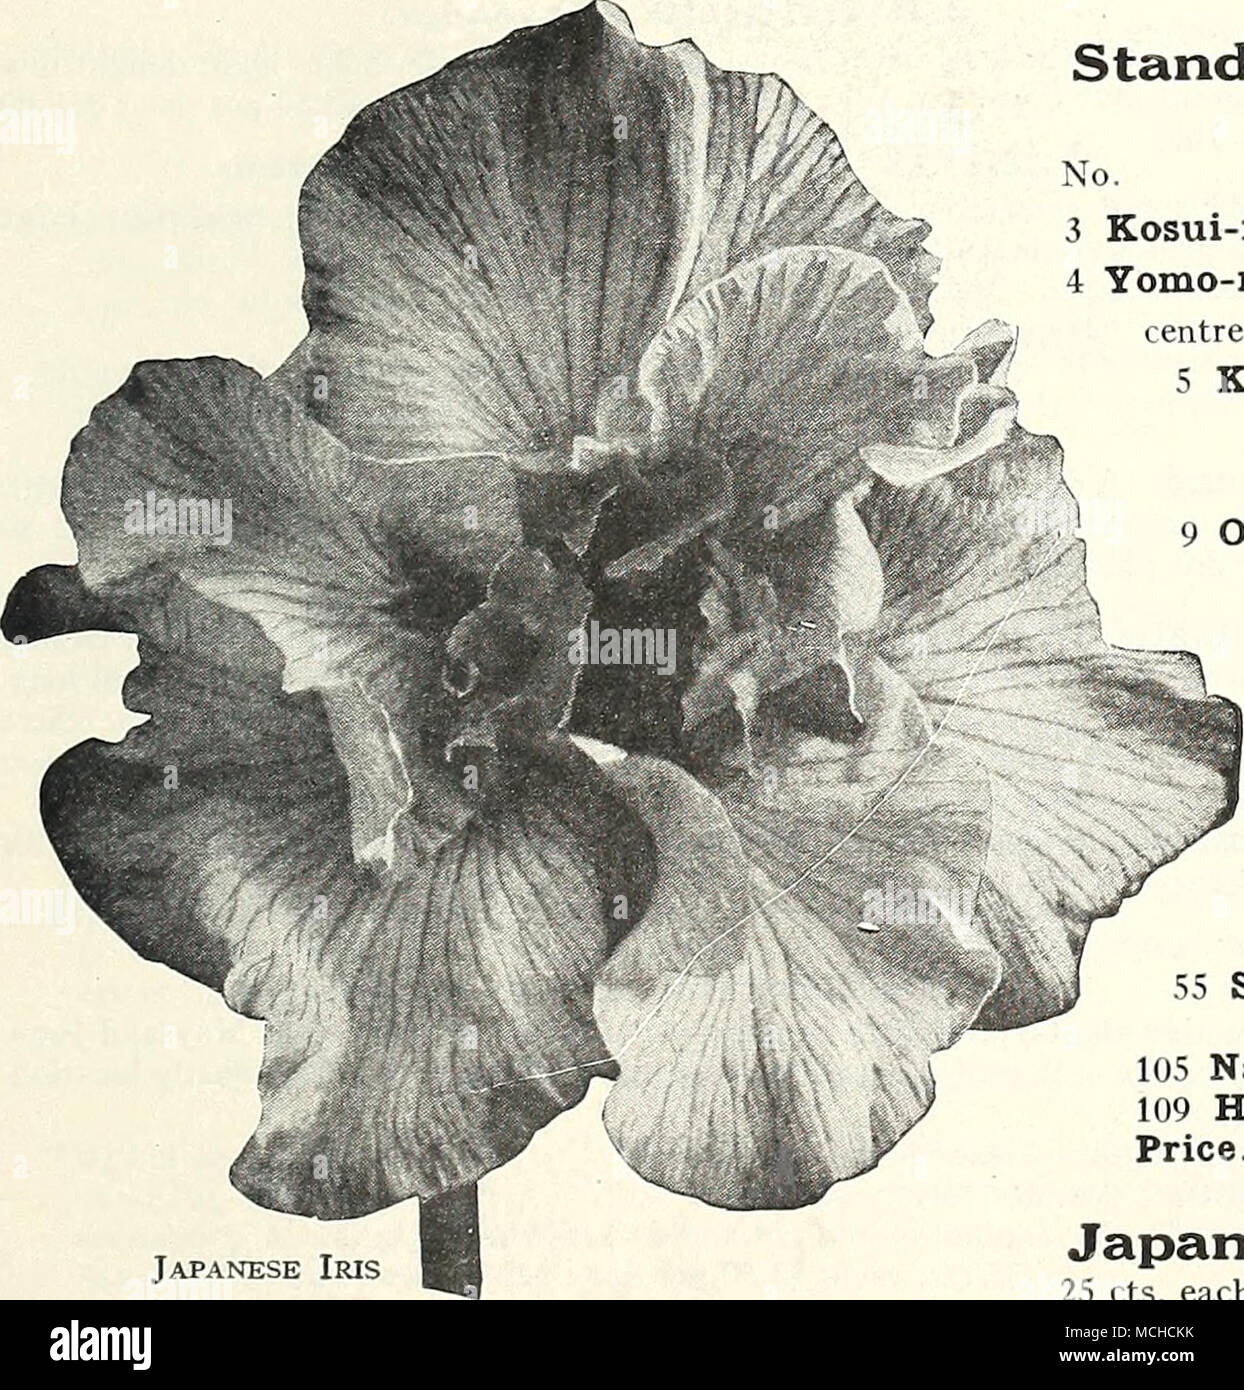 . Standard Collection Japanese Iris Order by name or number. No. 3 Kosui-no-iro. Violet-blue veined with white; 6 petals. 4 Yomo-no-umi. Finest white with six large petals, yellow ray in centre of each petal, forming a six-pointed star. 5 Koki-no-iro. Six petals, rich royal purple and few light veins radiating from the 'golden-yellow centre; standards white, tipped with rich purple. Extra fine. 9 Oniga-shima. Double dark blue veined white. 11 Hano-no-nishiki. Bright violet purple with white veinings, three well rounded petals. 19 Kyodaisan. Three large petals light lilac blue, the nearest appr Stock Photo